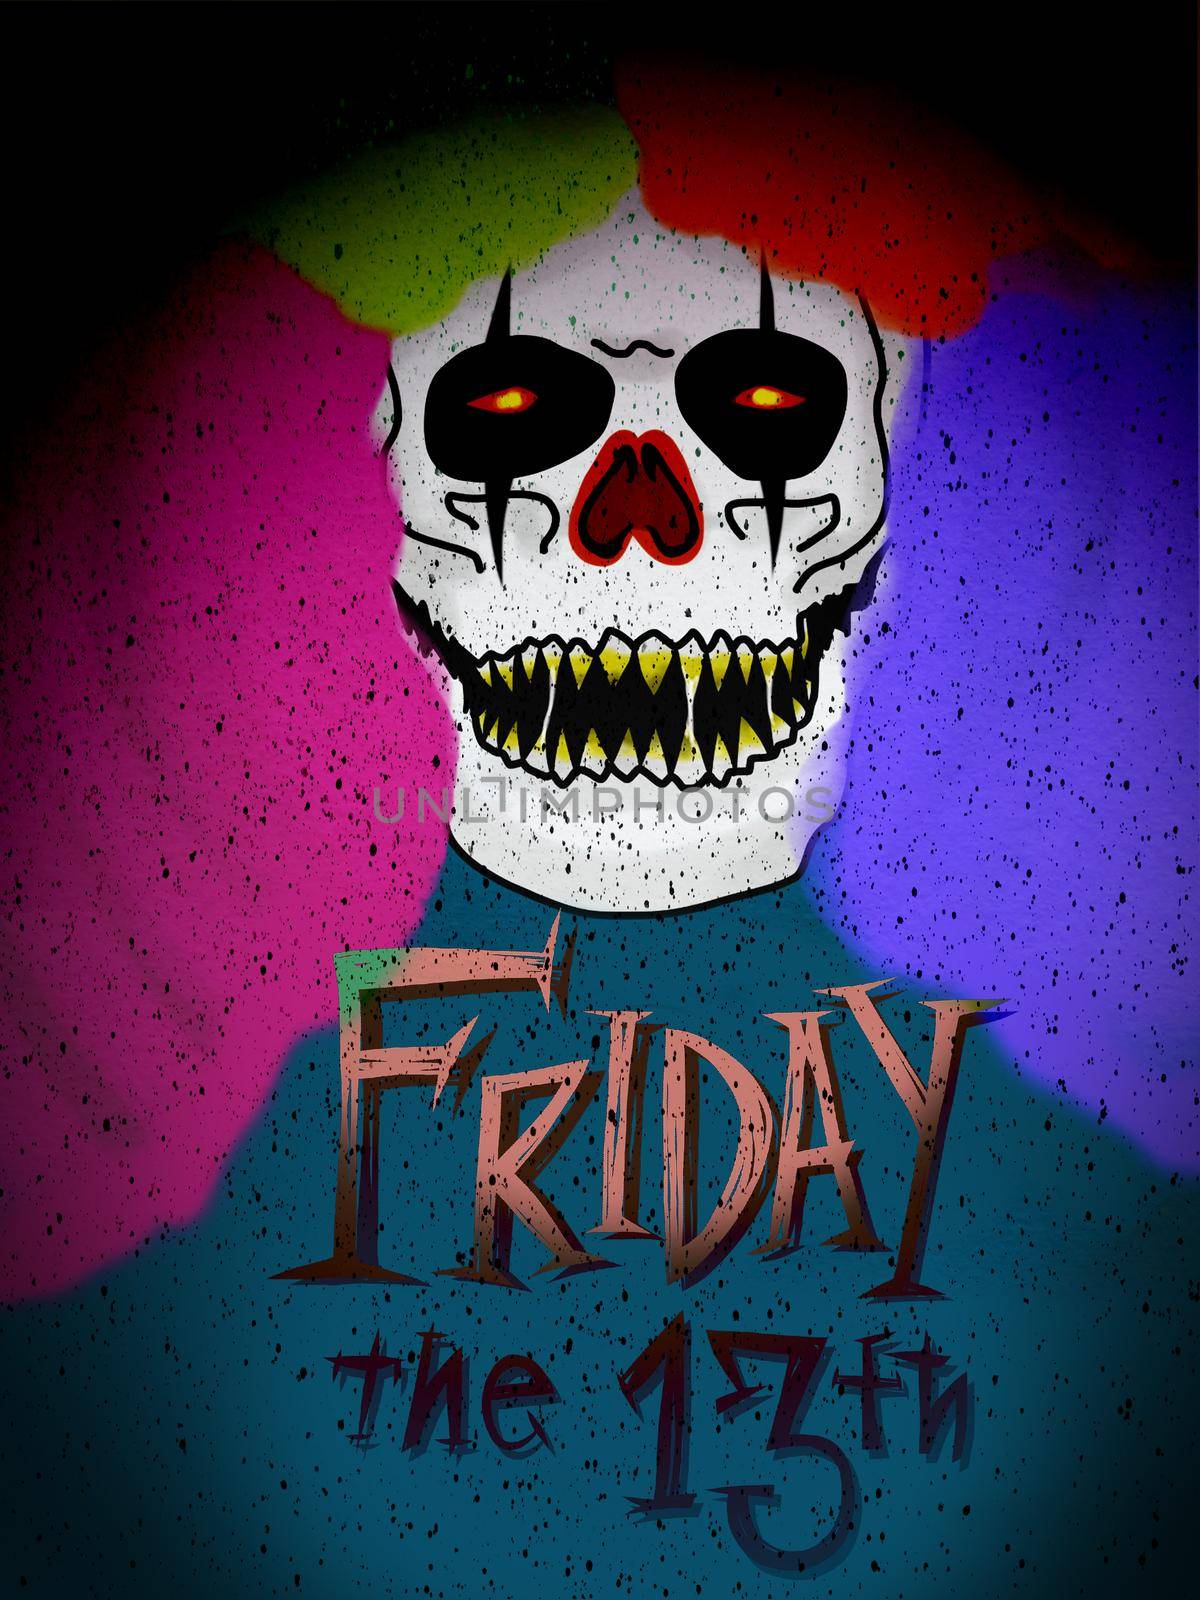 Monster clown Friday 13th painting illustration